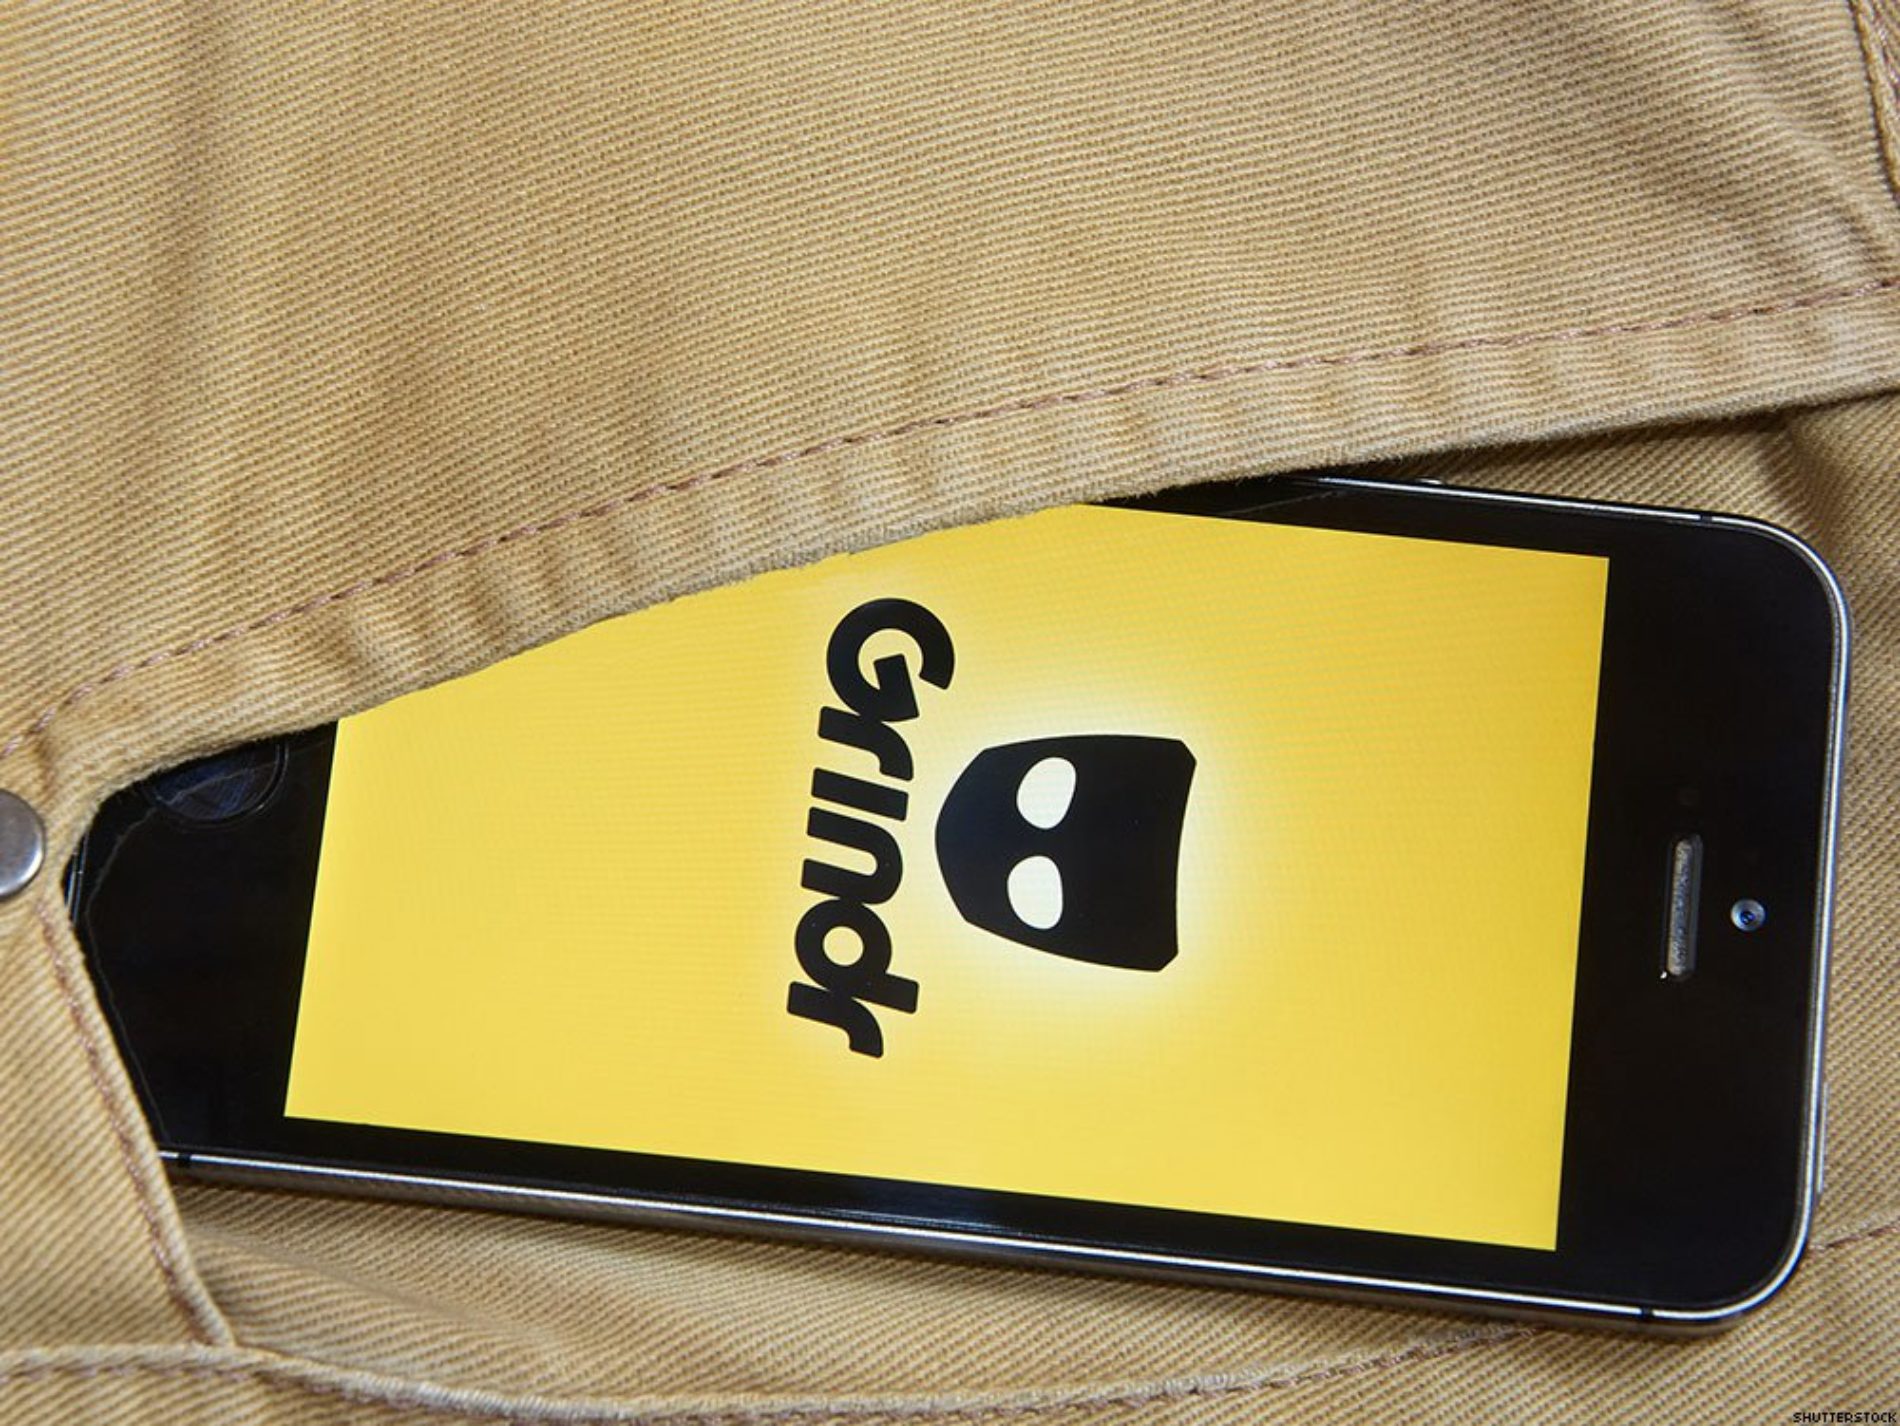 Grindr to allow users in anti-gay countries to change Grindr icon on their phones as security measure